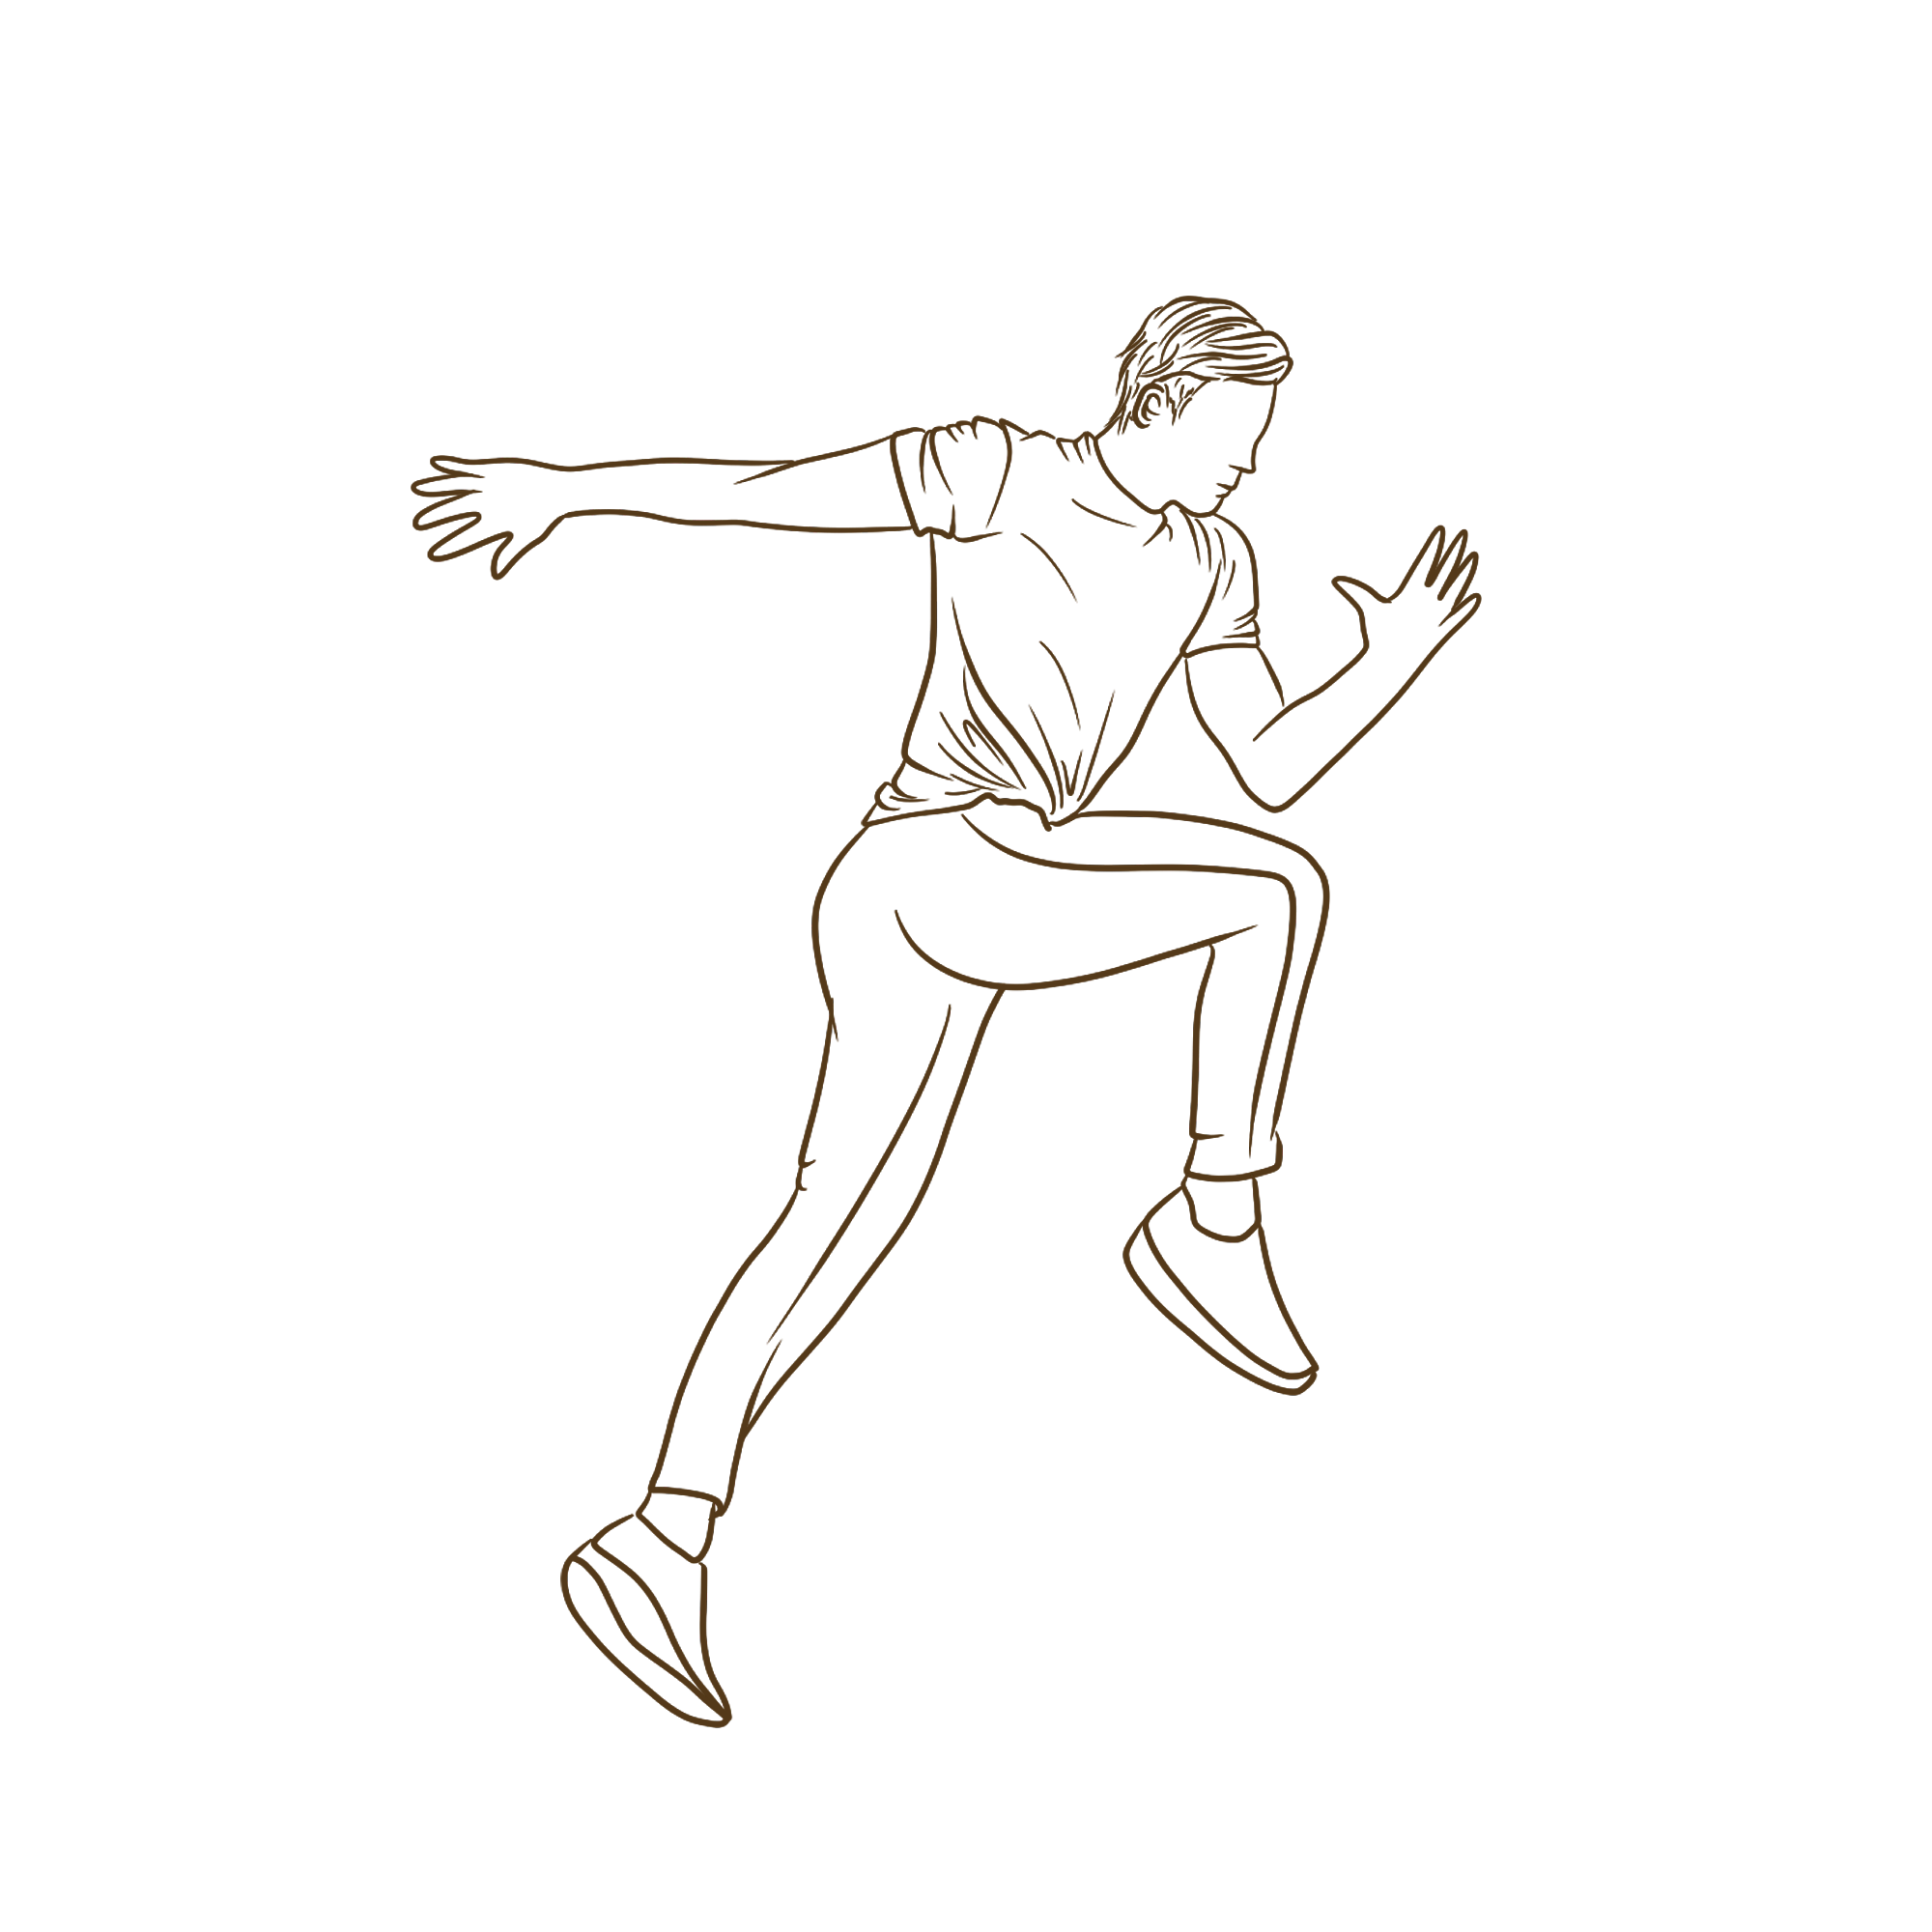 Running Man Animated PNG Photo